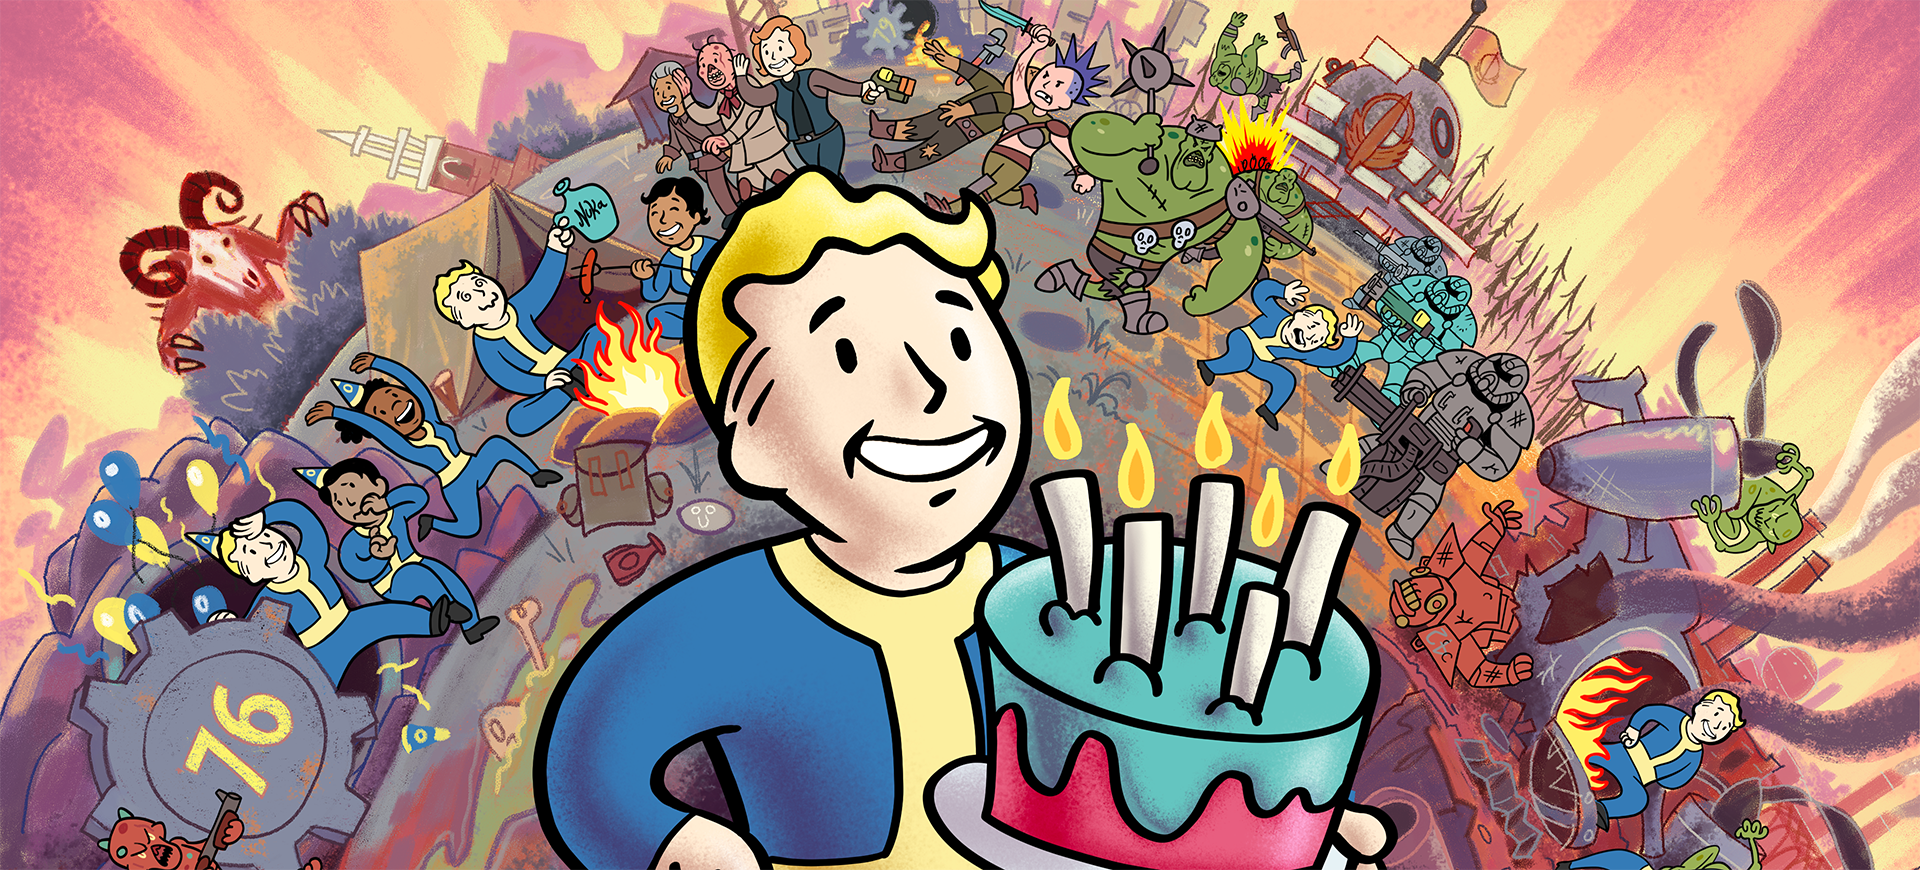 Fallout 76 Birthday Bundle - Prime Gaming/Xbox Game Pass Ultimate